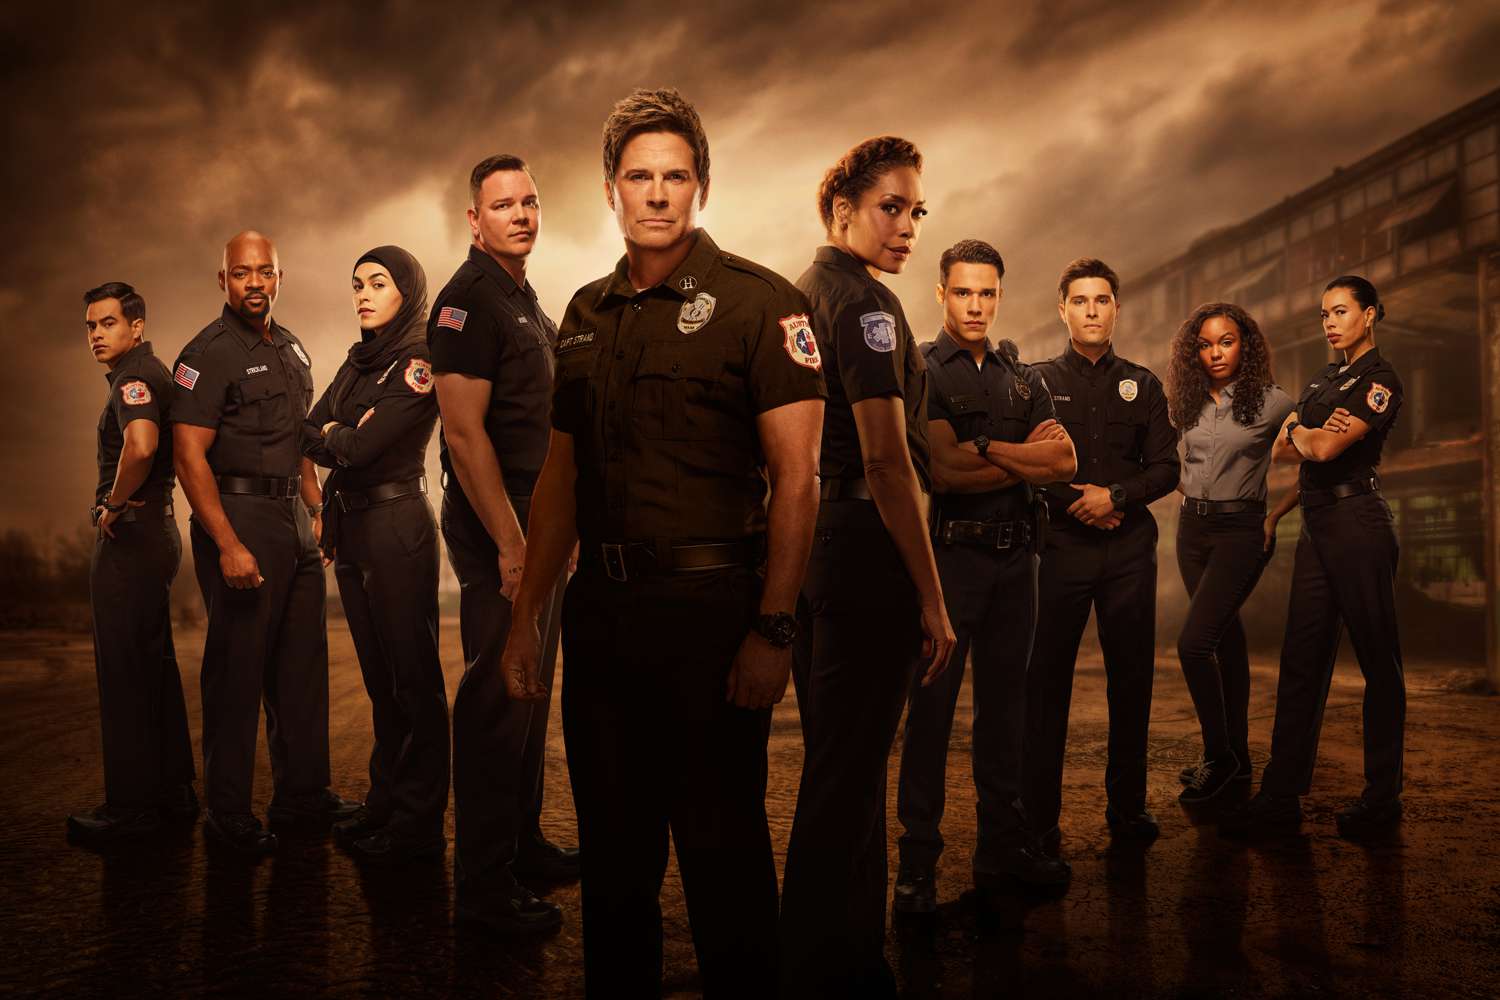 '9-1-1: Lone Star's First Season 5 Teaser Promises an 'Off the Rails' Train Crash: 'This Isn't the End'